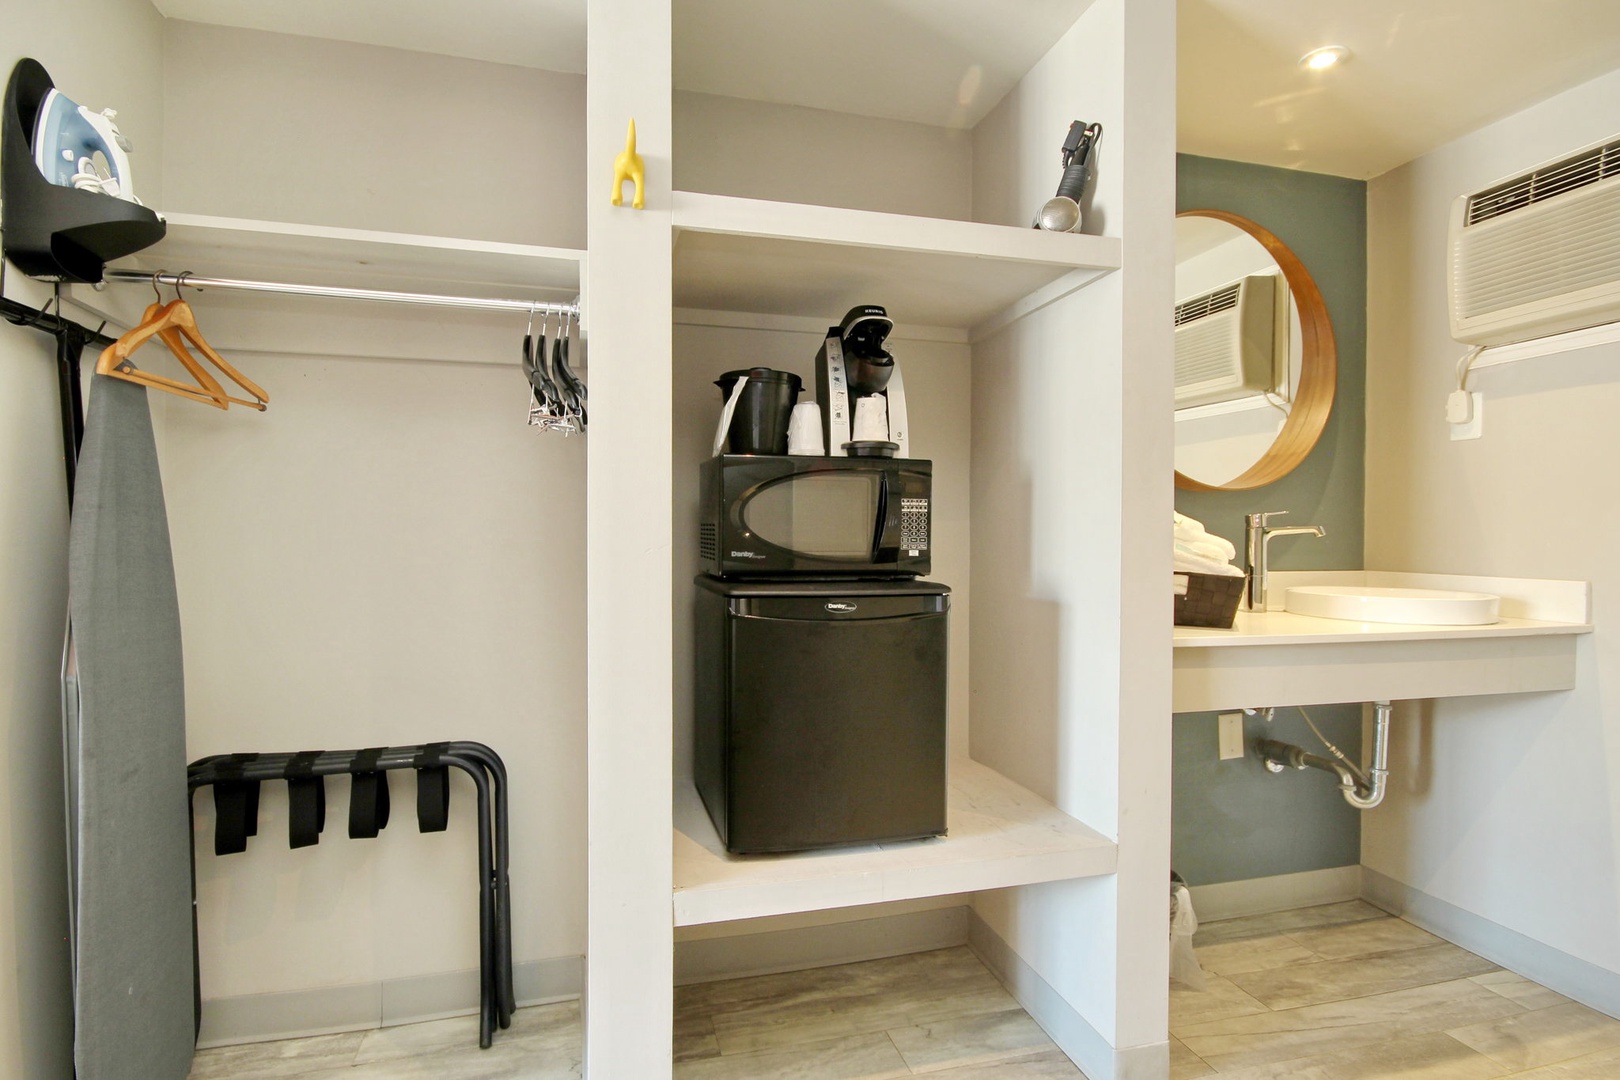 Self-catering made easy with kitchenette